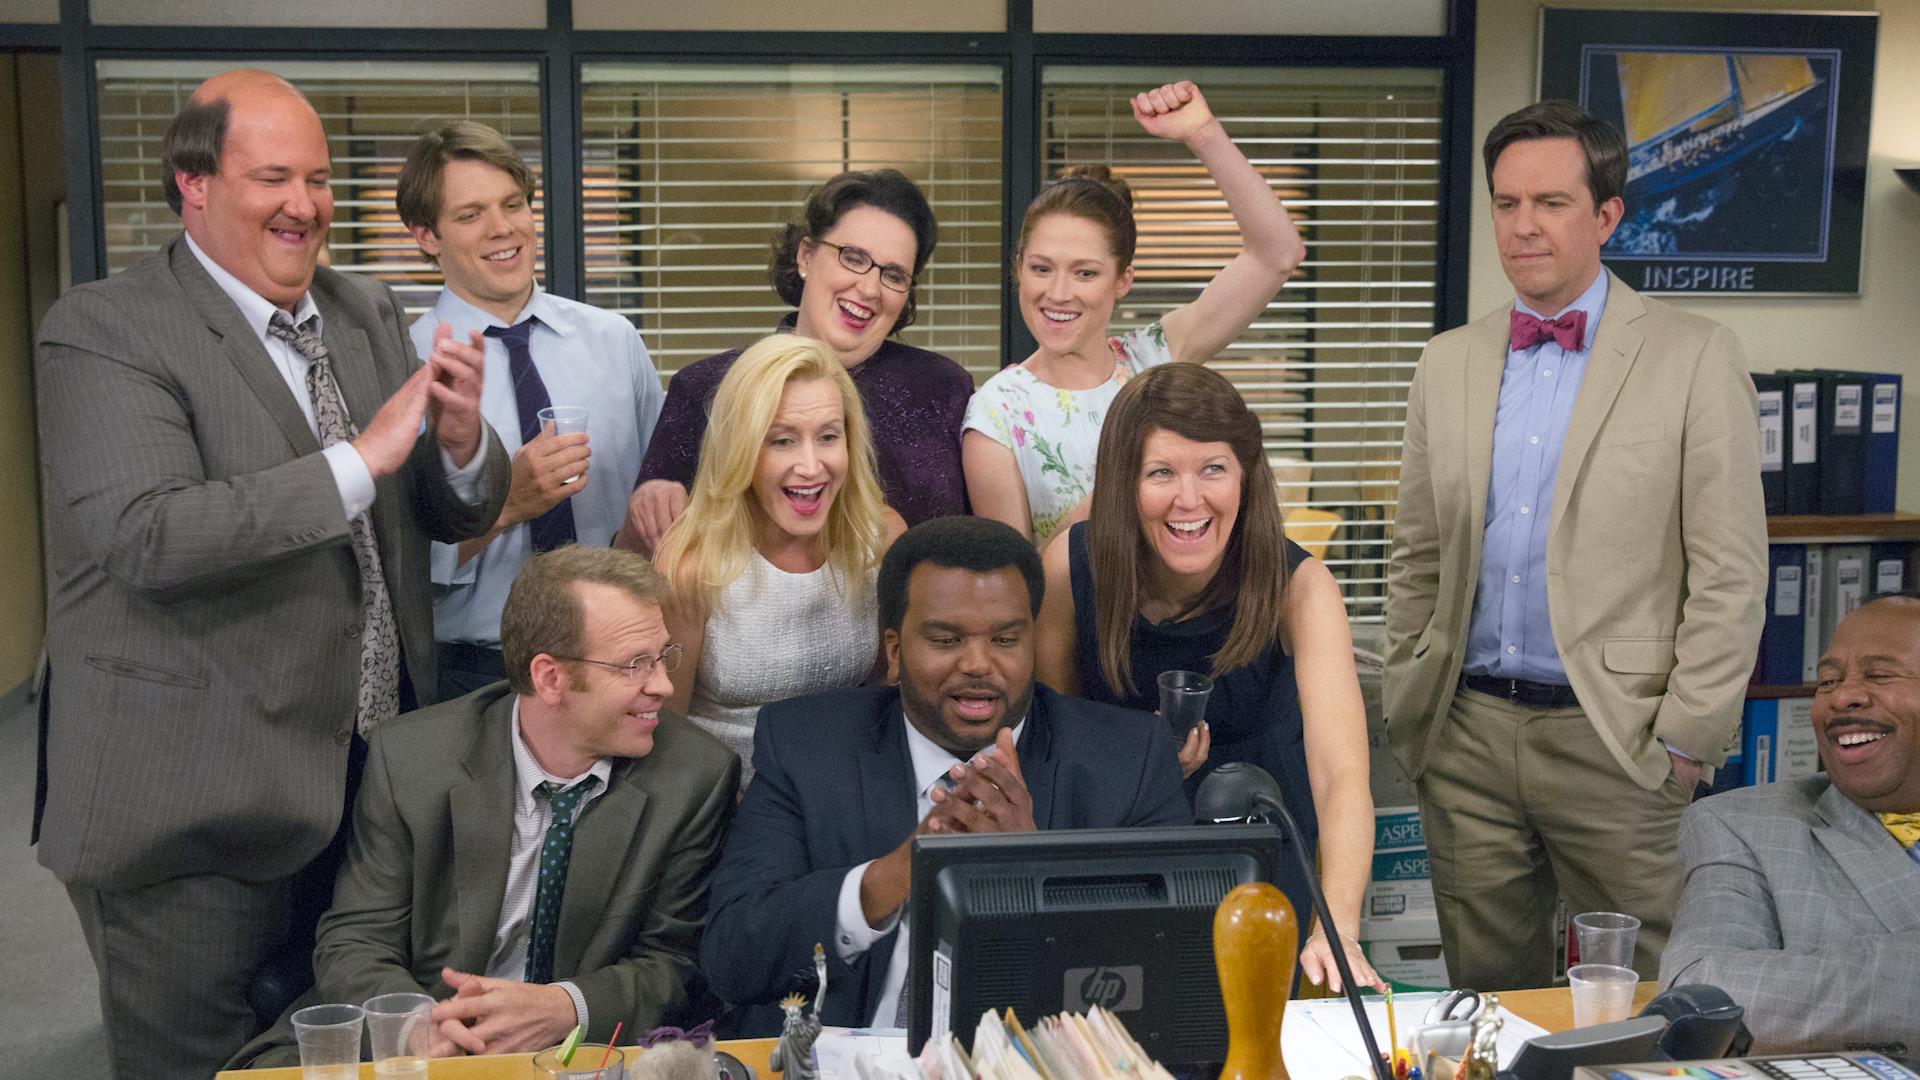 Stars of 'The Office' share memories from finale